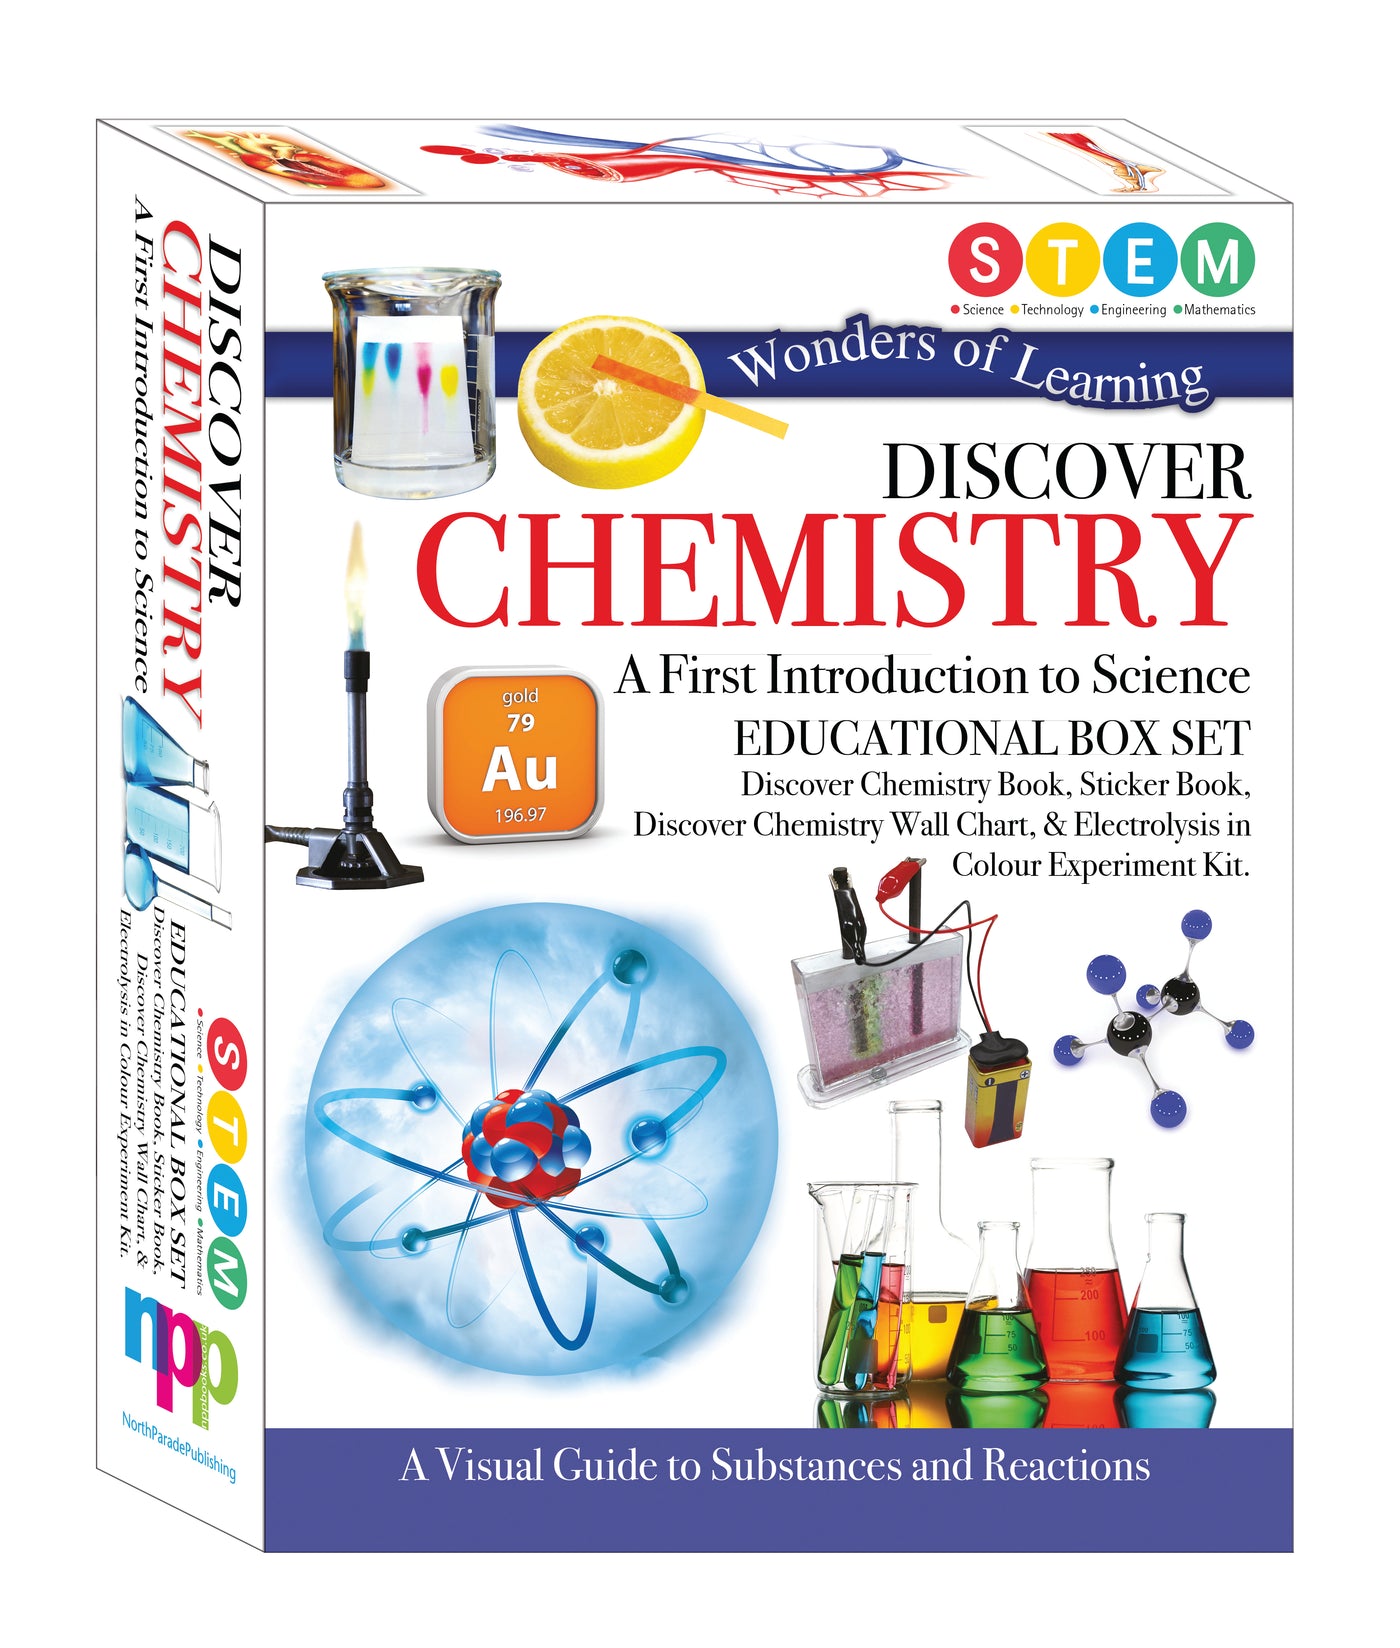 Discover Chemistry - Educational BOX SET for Children - Top Pick